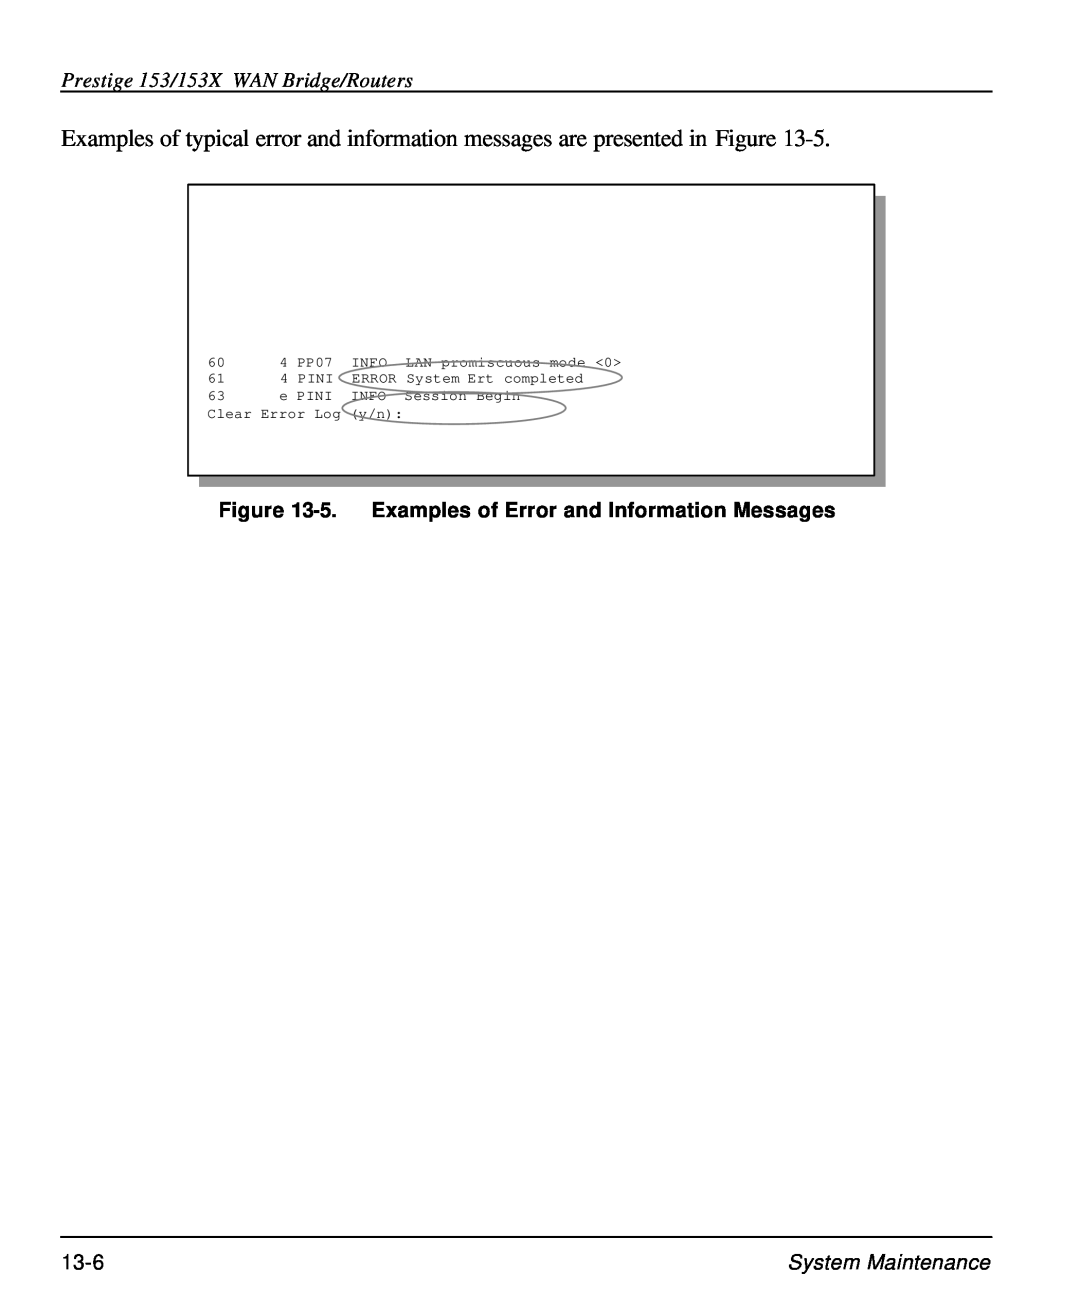 ZyXEL Communications user manual Prestige 153/153X WAN Bridge/Routers, 5. Examples of Error and Information Messages 